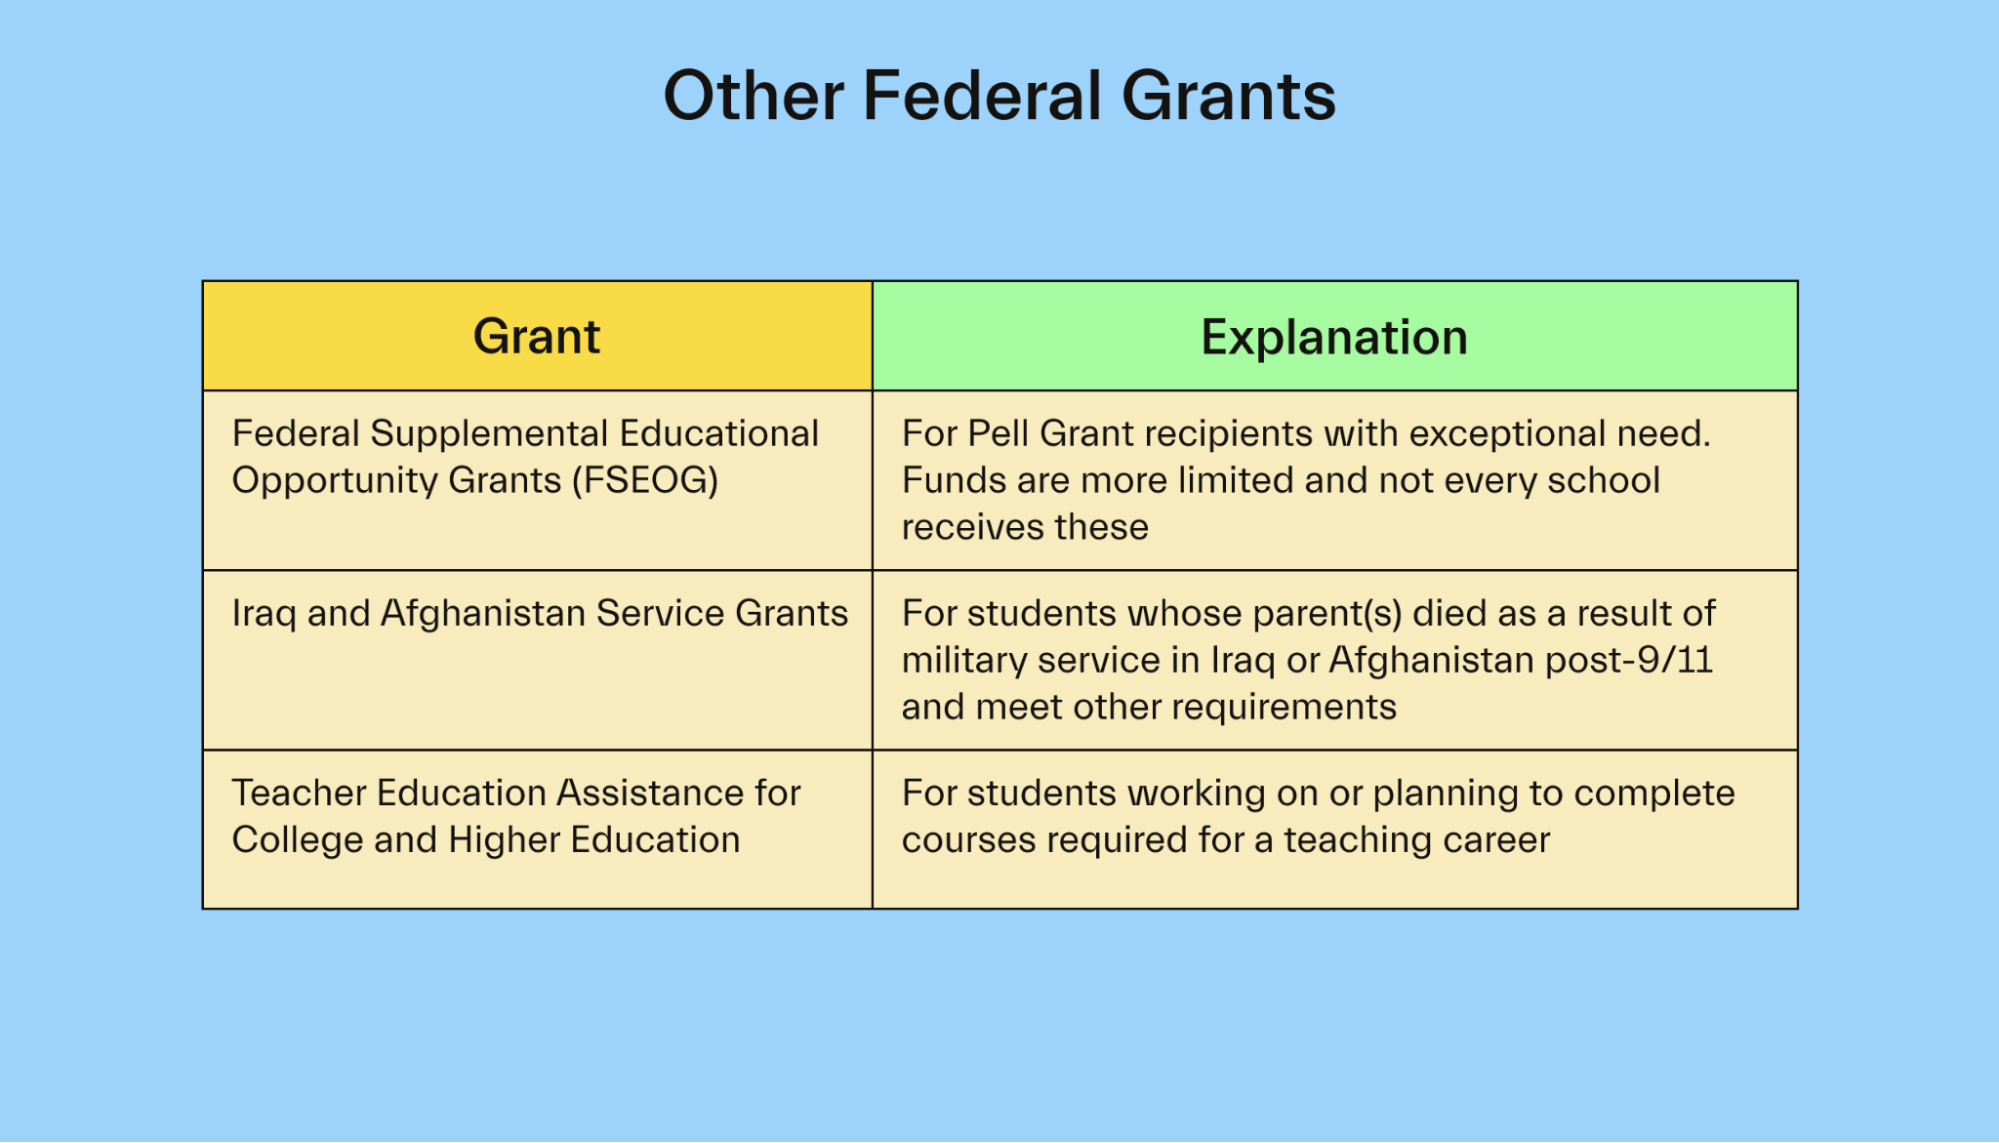 Other Federal Grants